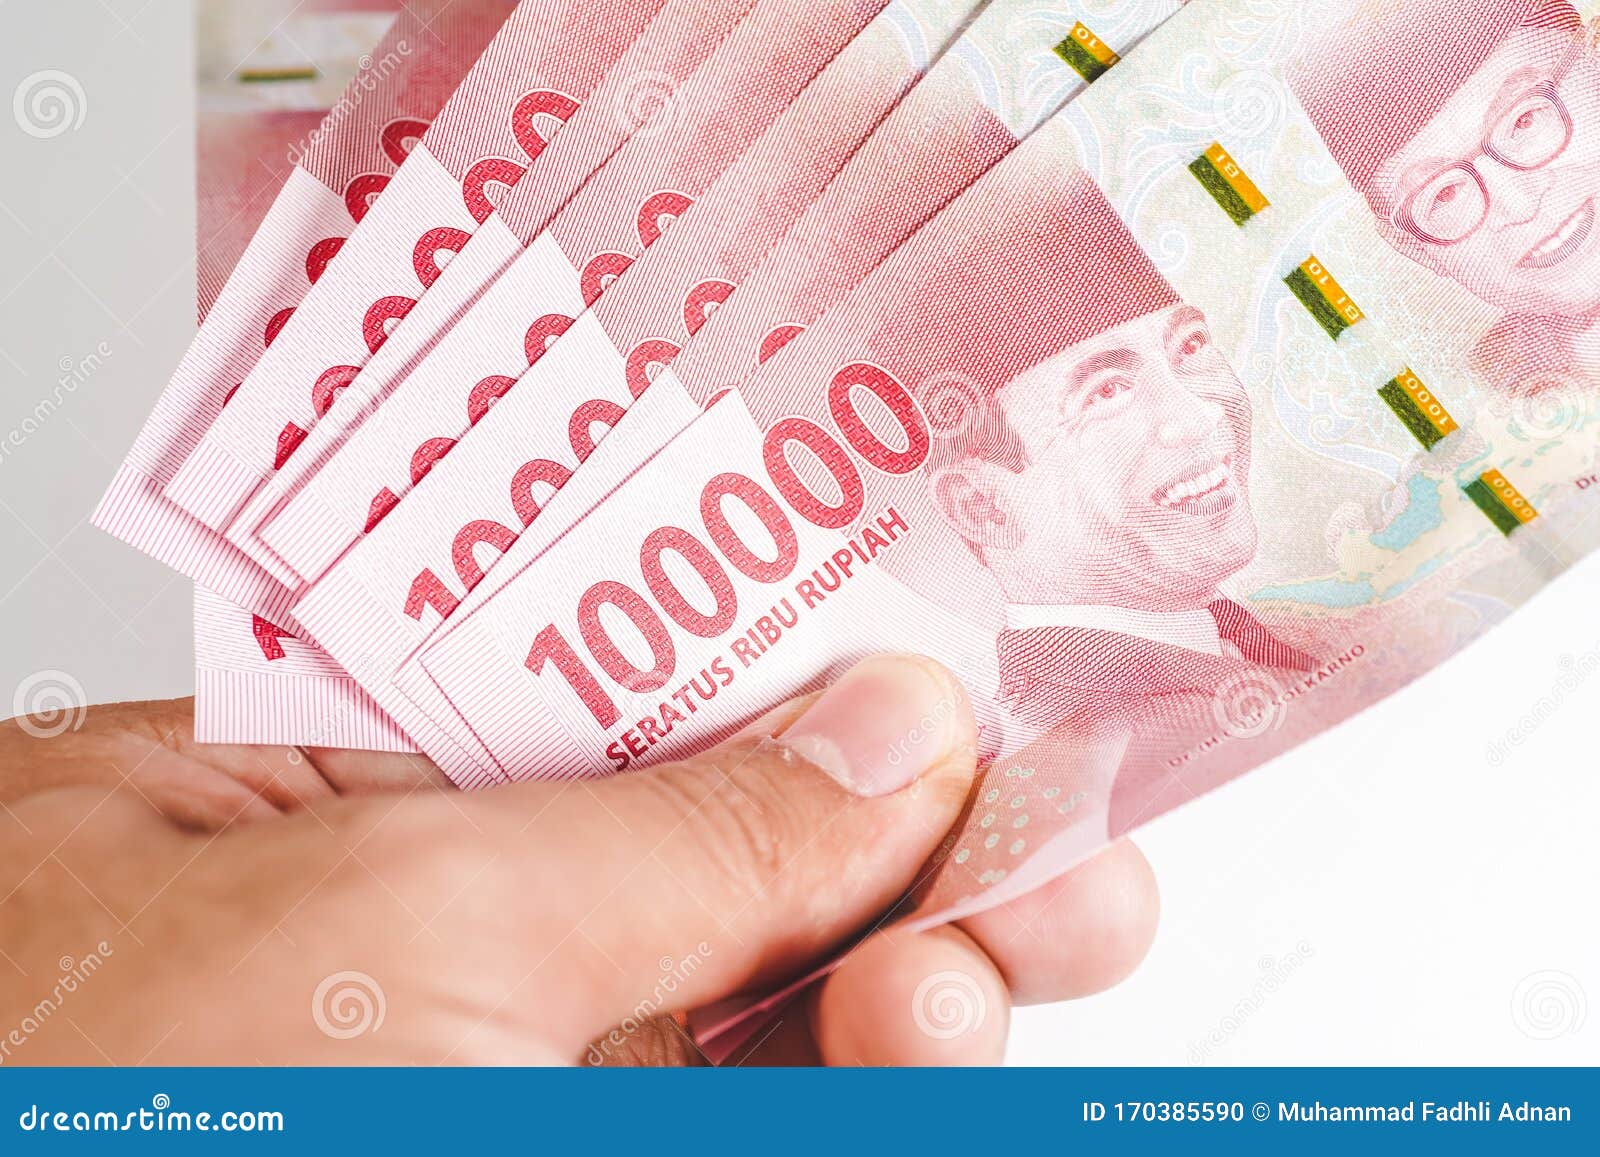  Indonesian  Rupiah Currency  Notes Stock Photo Image of 